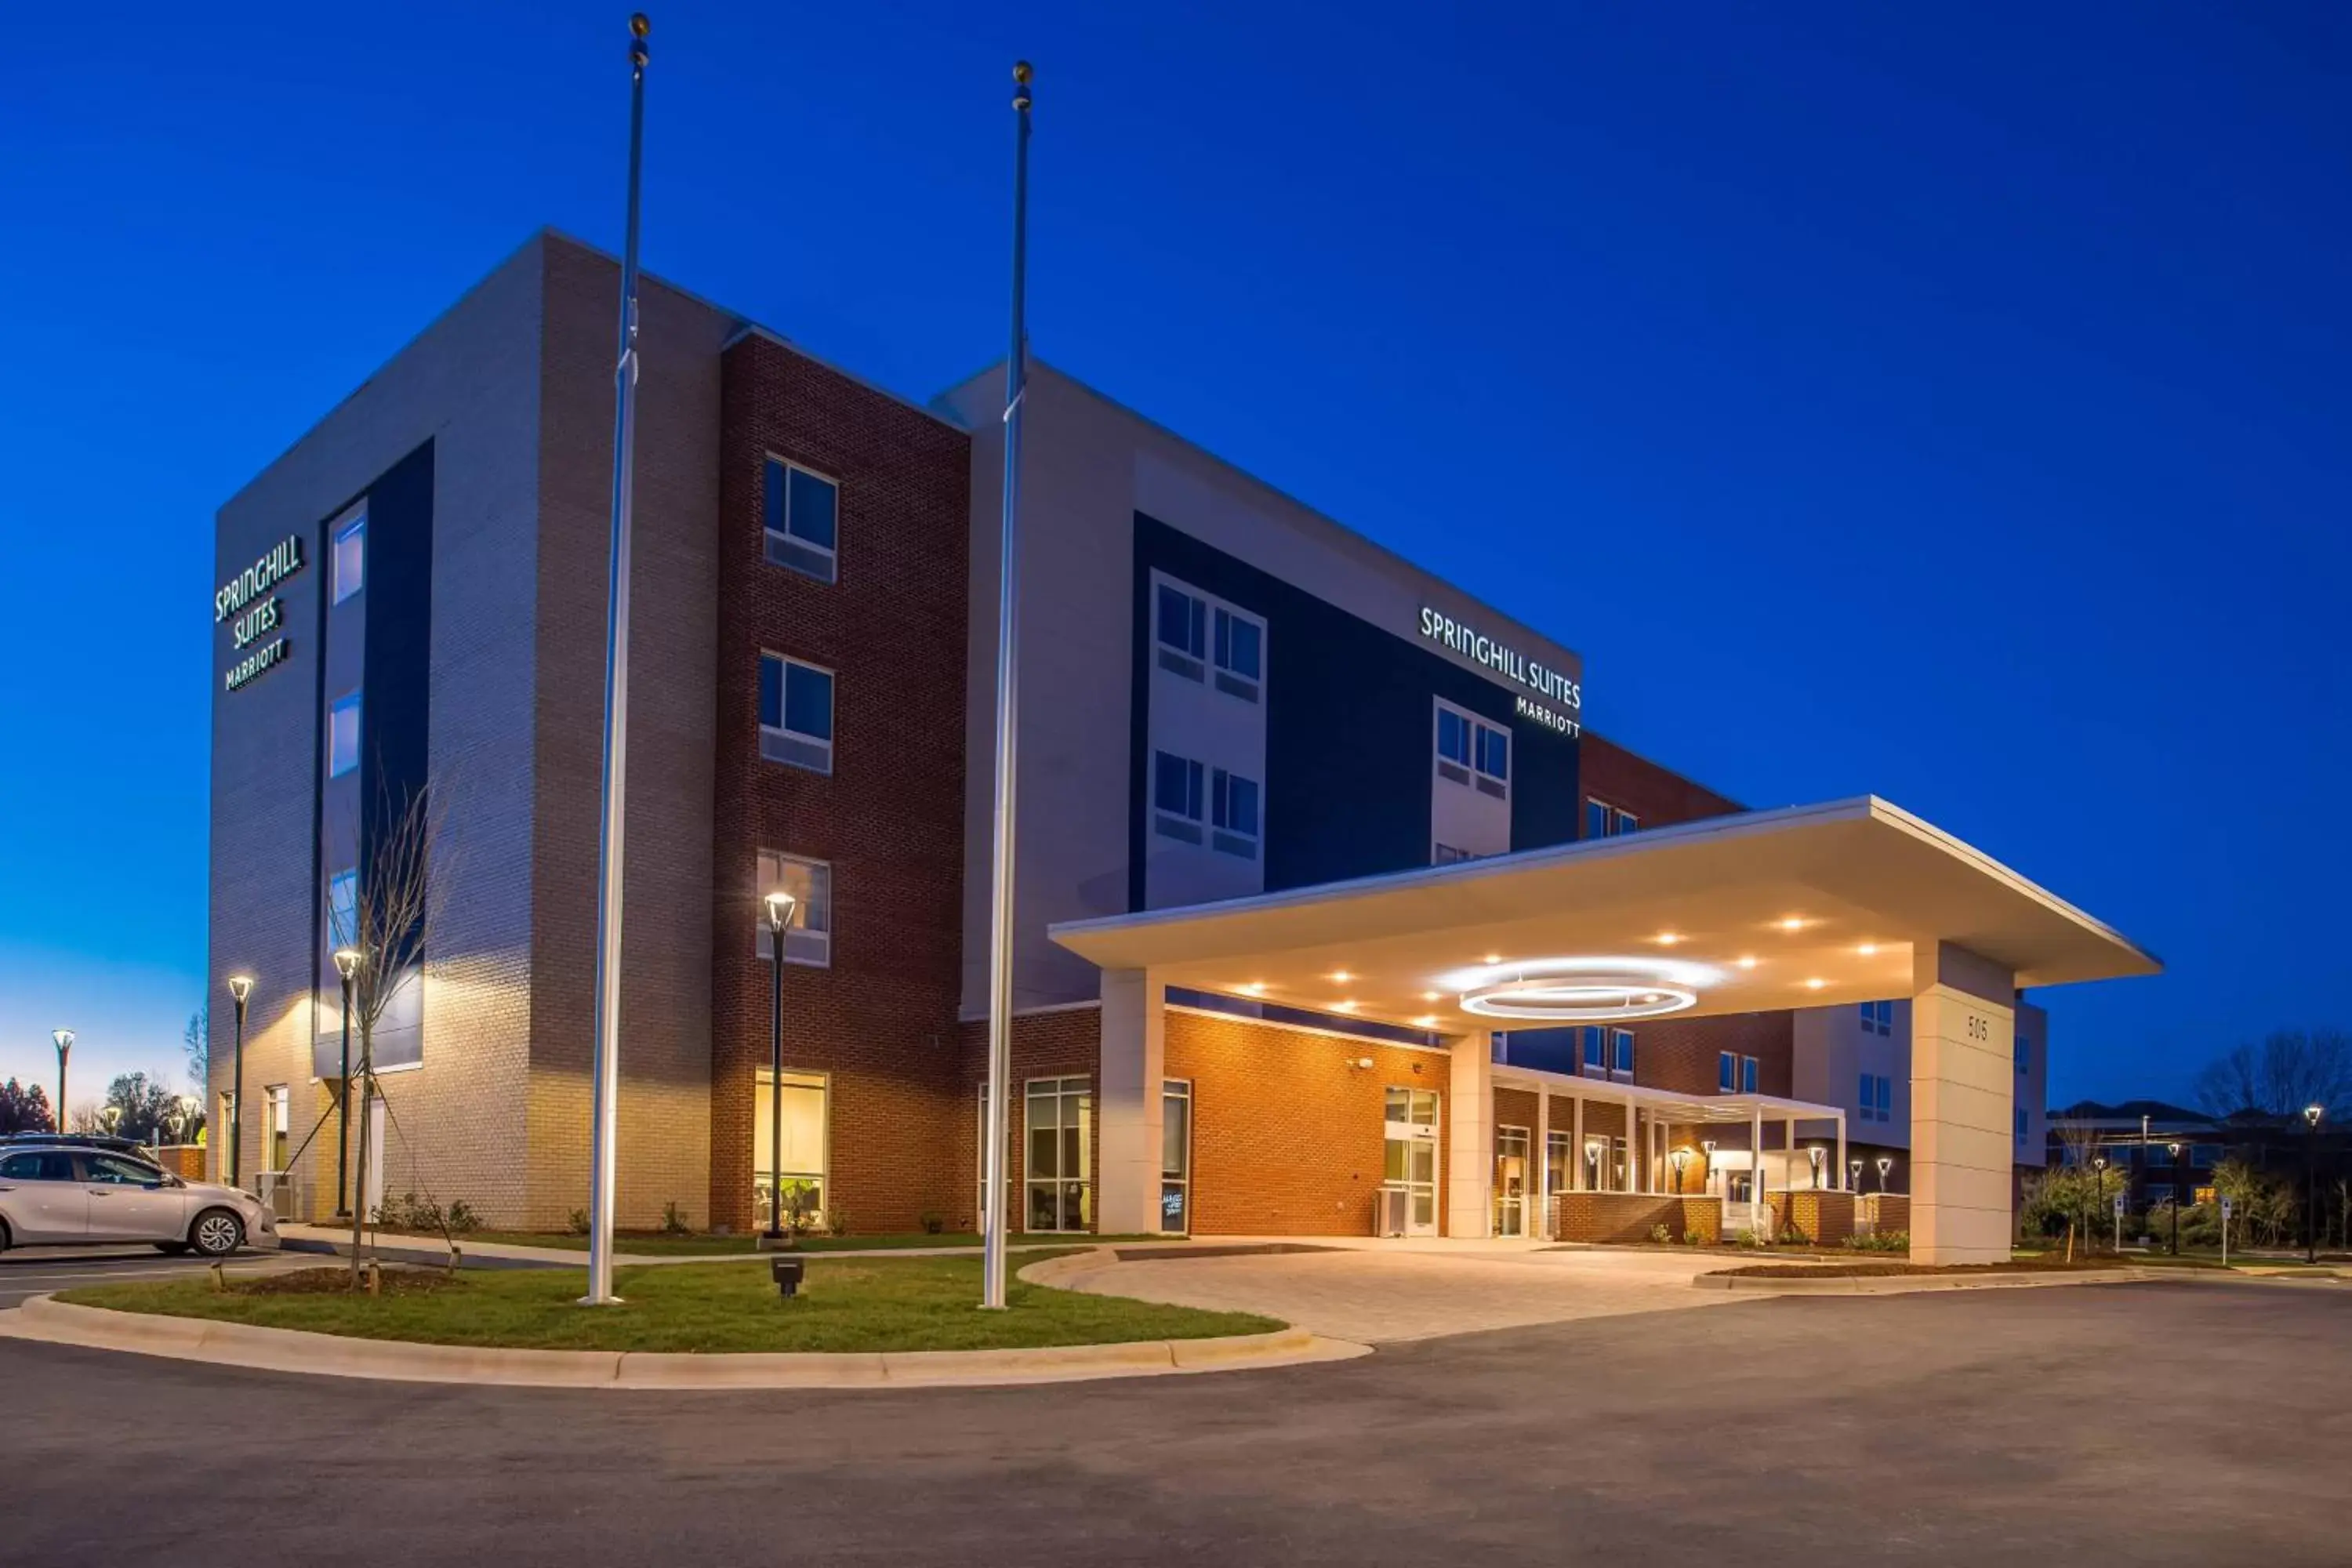 Property Building in SpringHill Suites by Marriott Greensboro Airport